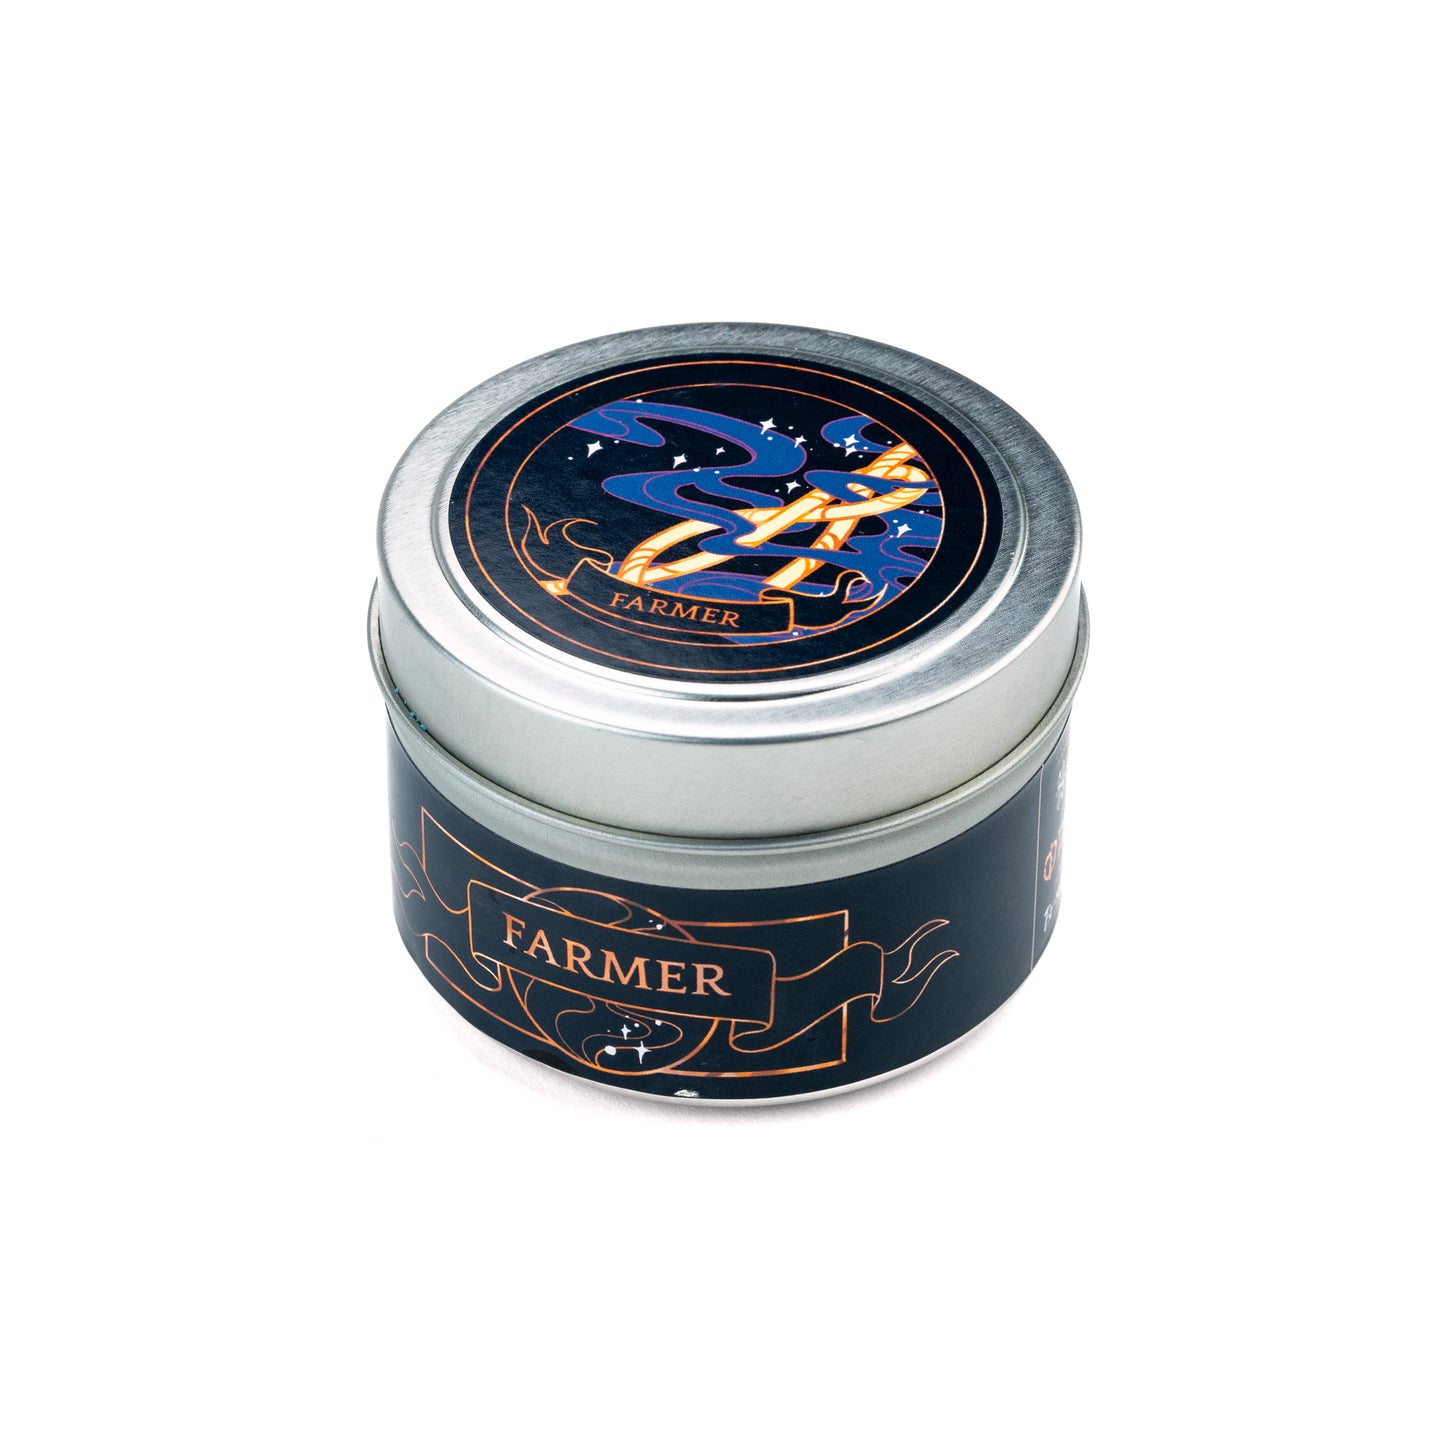 Farmer Candle - Tamora Pierce Officially Licensed - Soy Vegan Candle